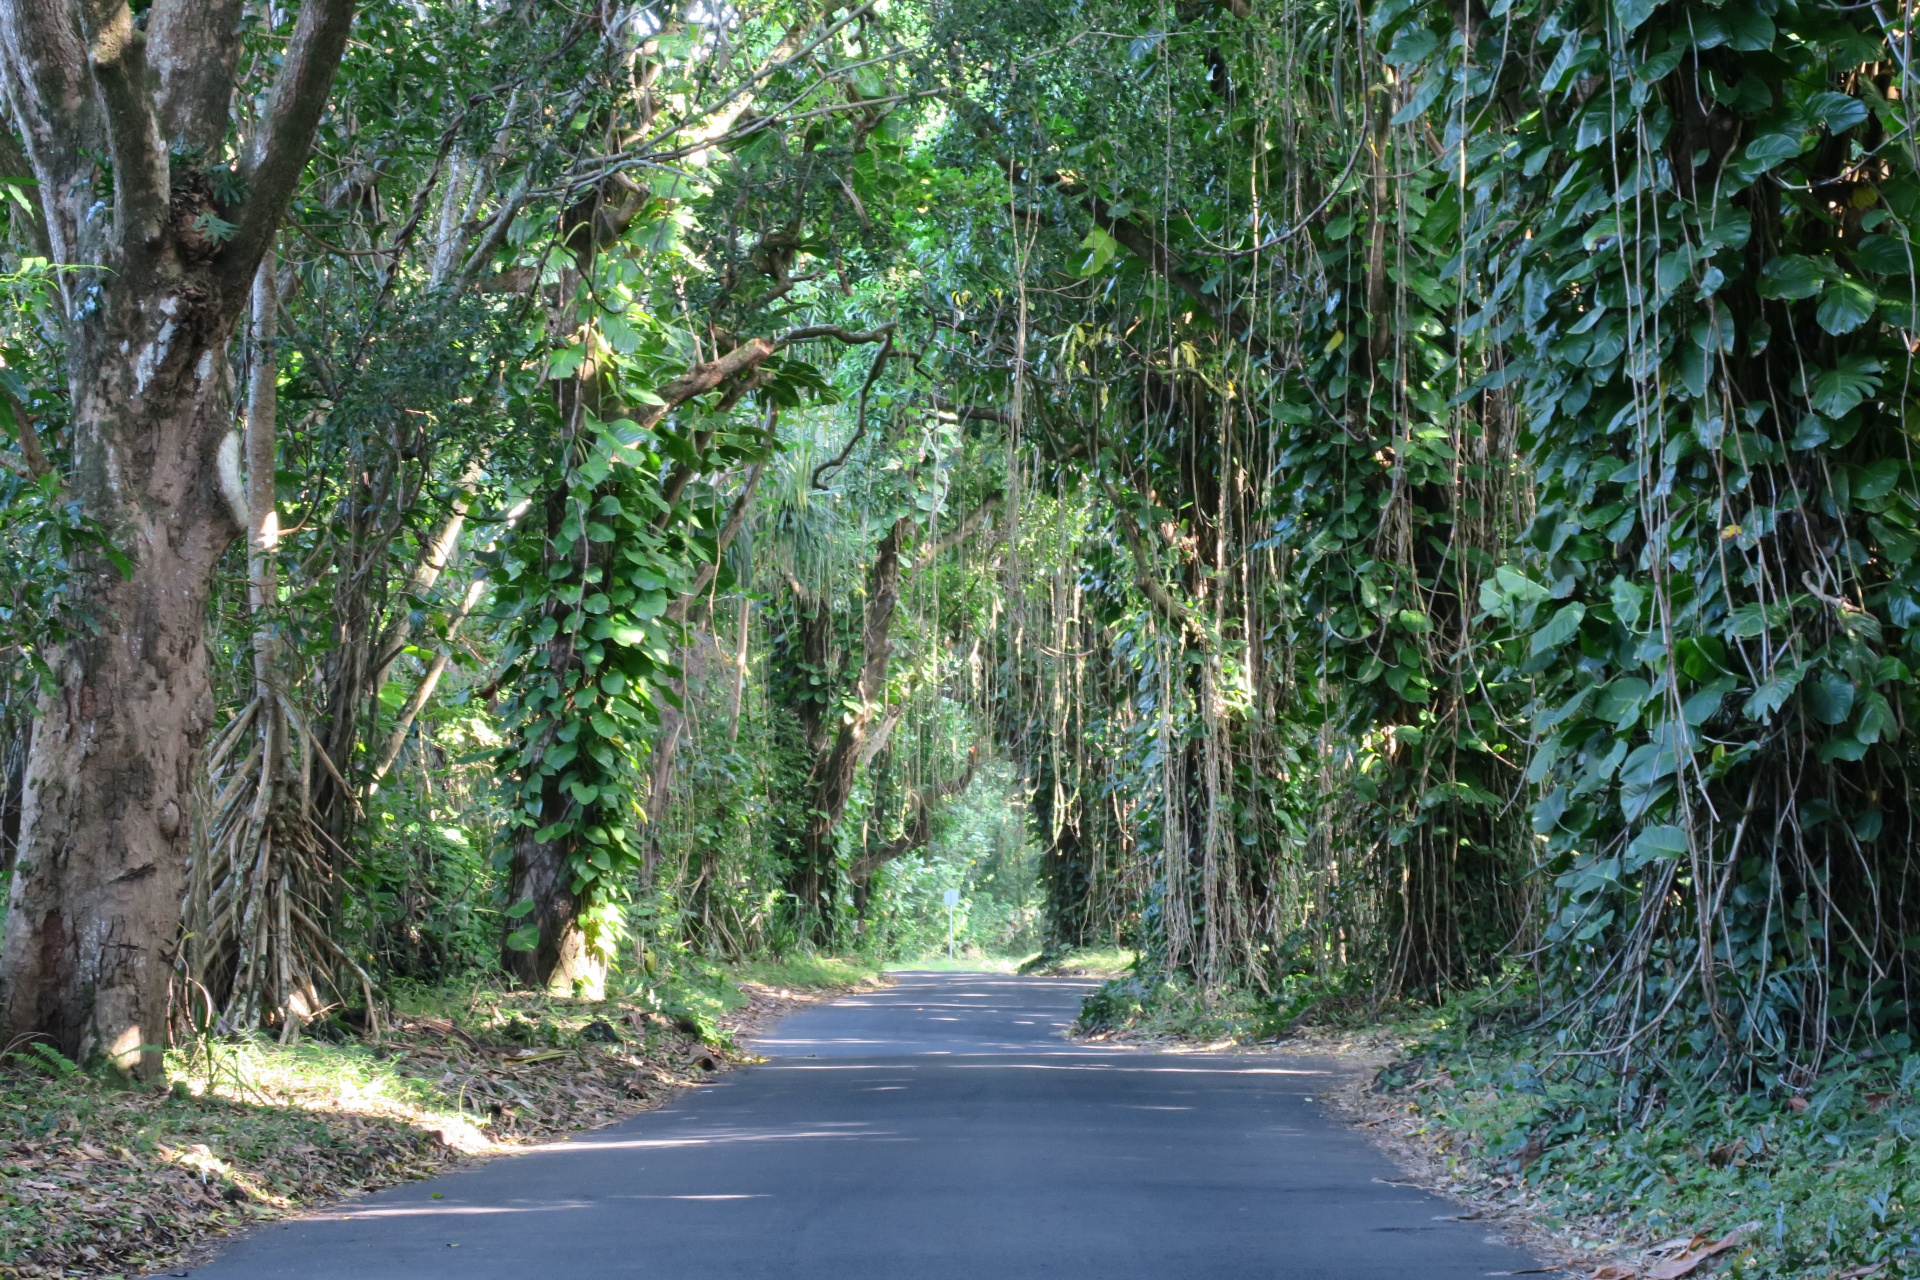 There were really cool trees and vines creating a canopy effect over the roads